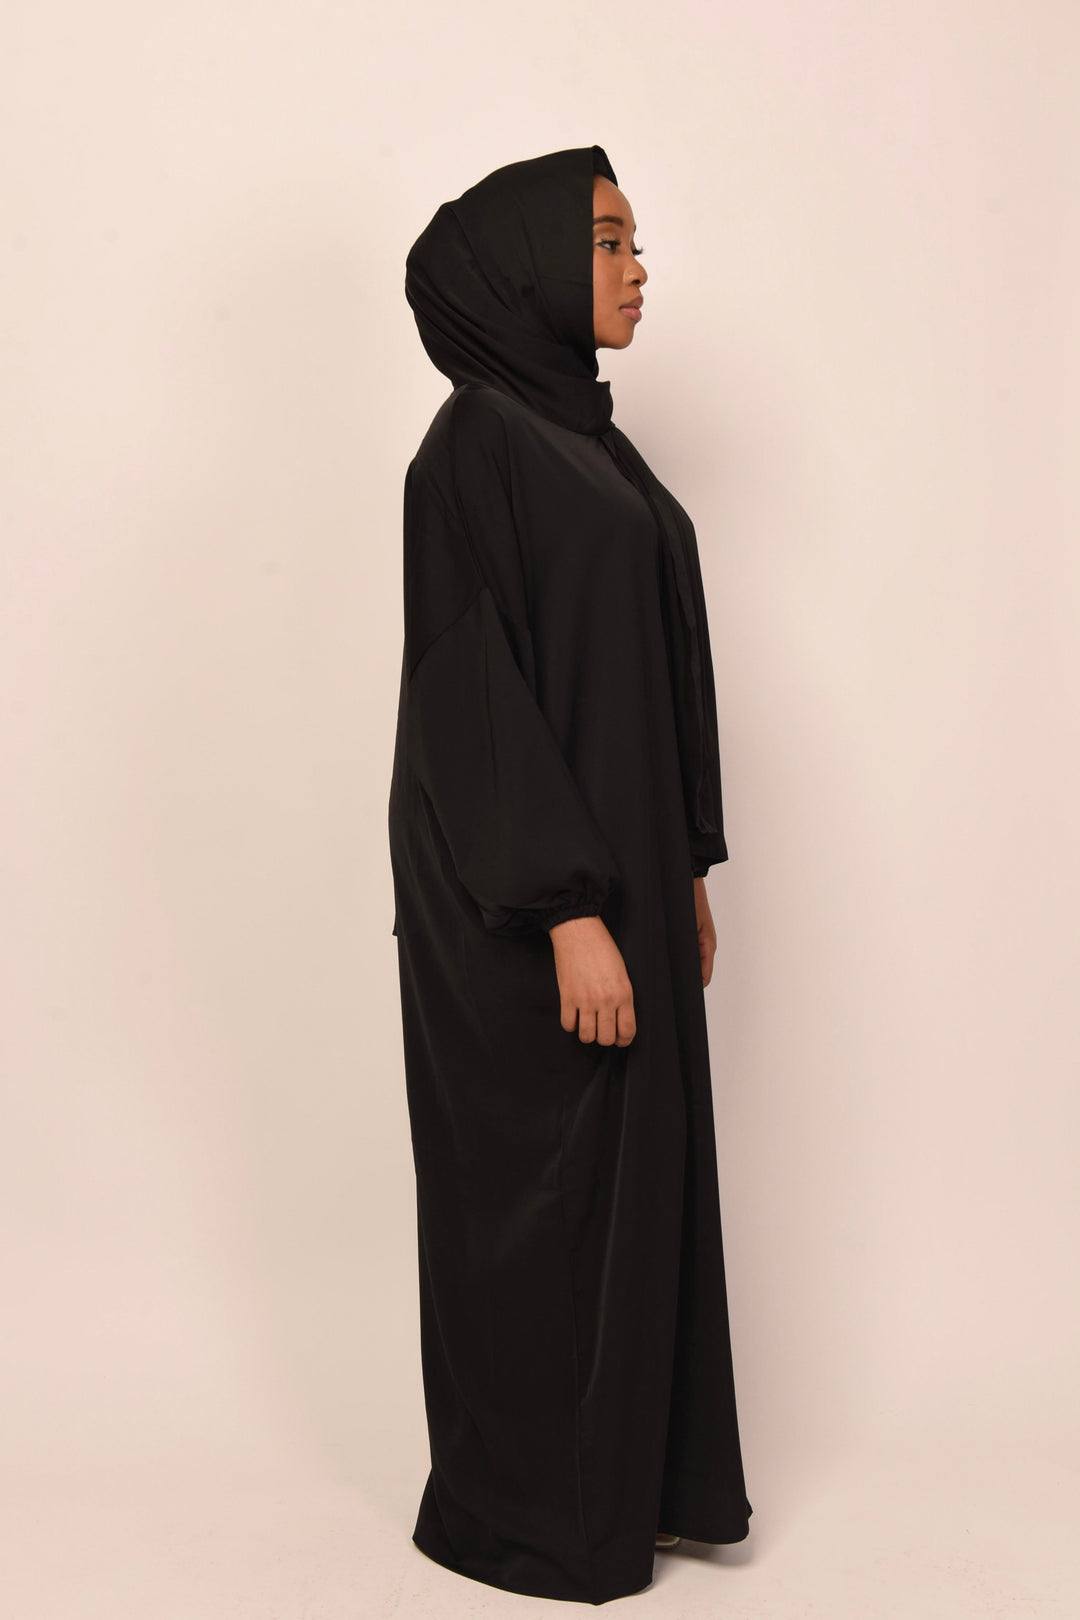 Get trendy with Salima Abaya With Hijab - Black -  available at Voilee NY. Grab yours for $42.90 today!